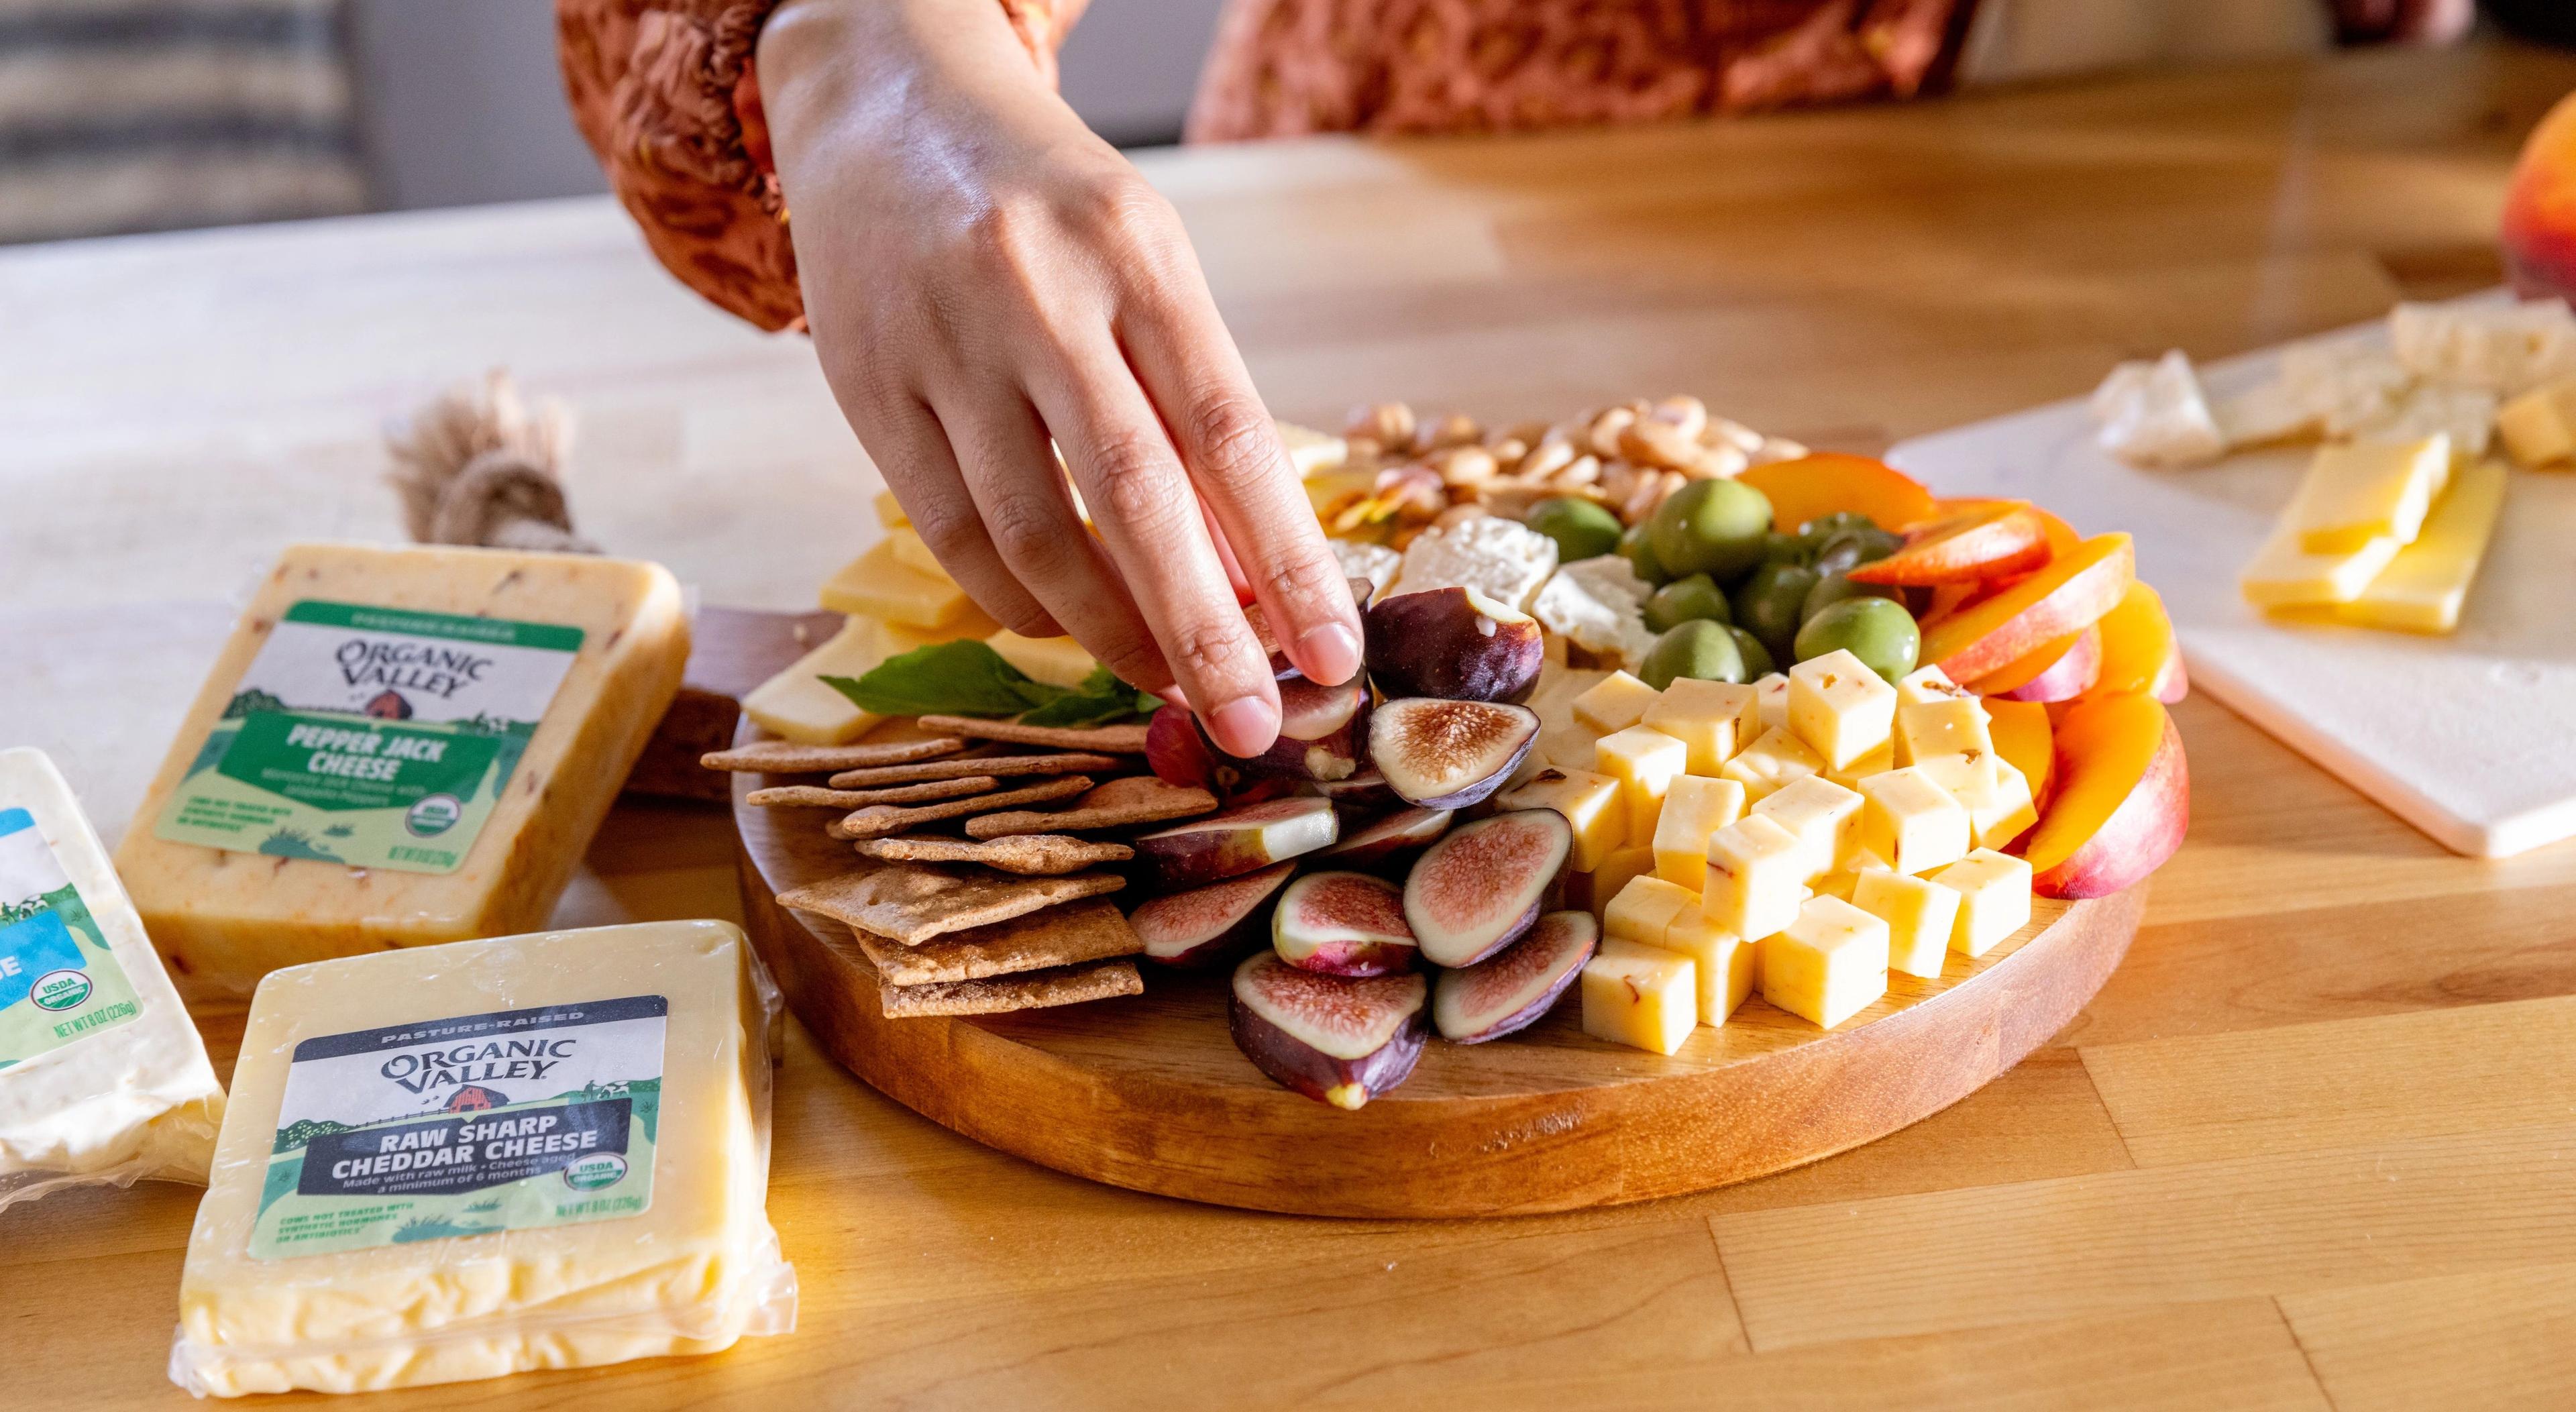 A woman arranges cheese, crackers, olives on a board.